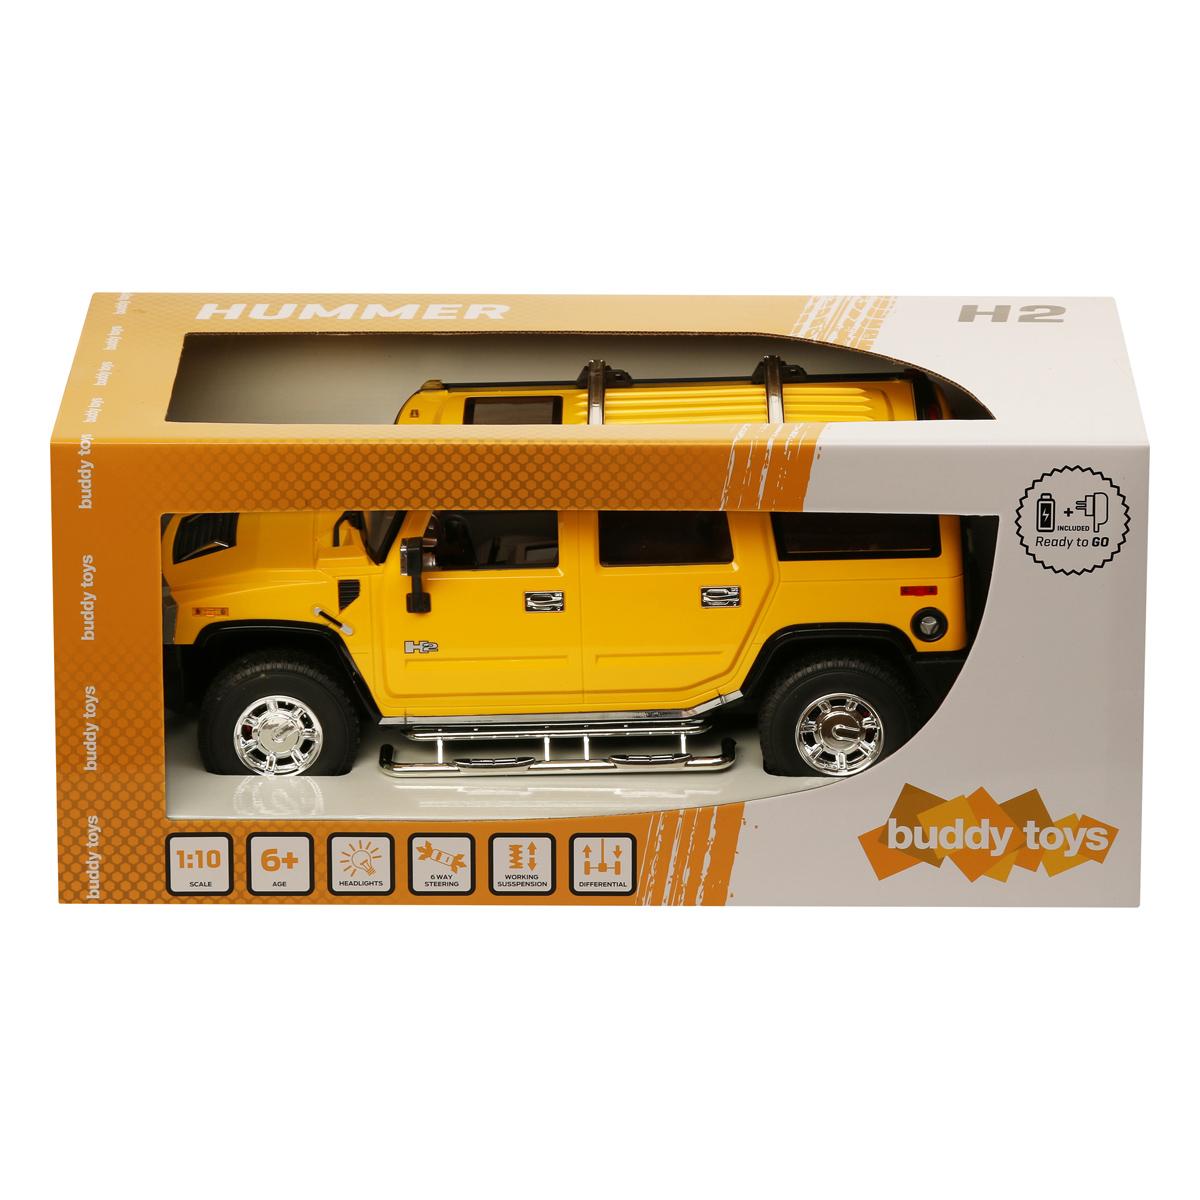 Hummer Toy Car Remote Control: Choosing the Right Hummer Toy Car Remote Control Model